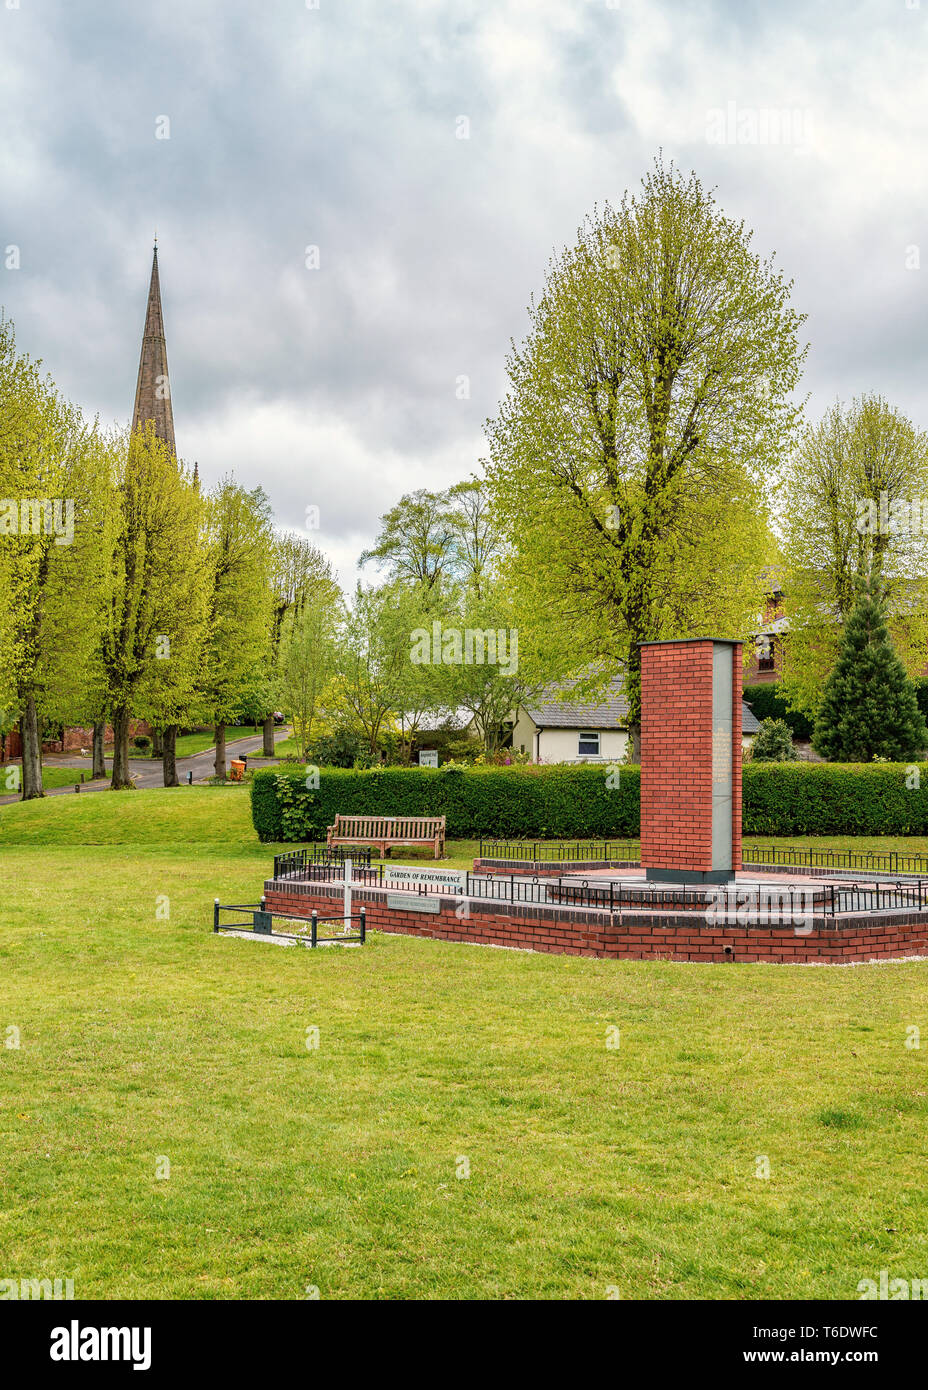 Garden Of Remembrance in Bromsgrove, Worcestershire, England. Stock Photo